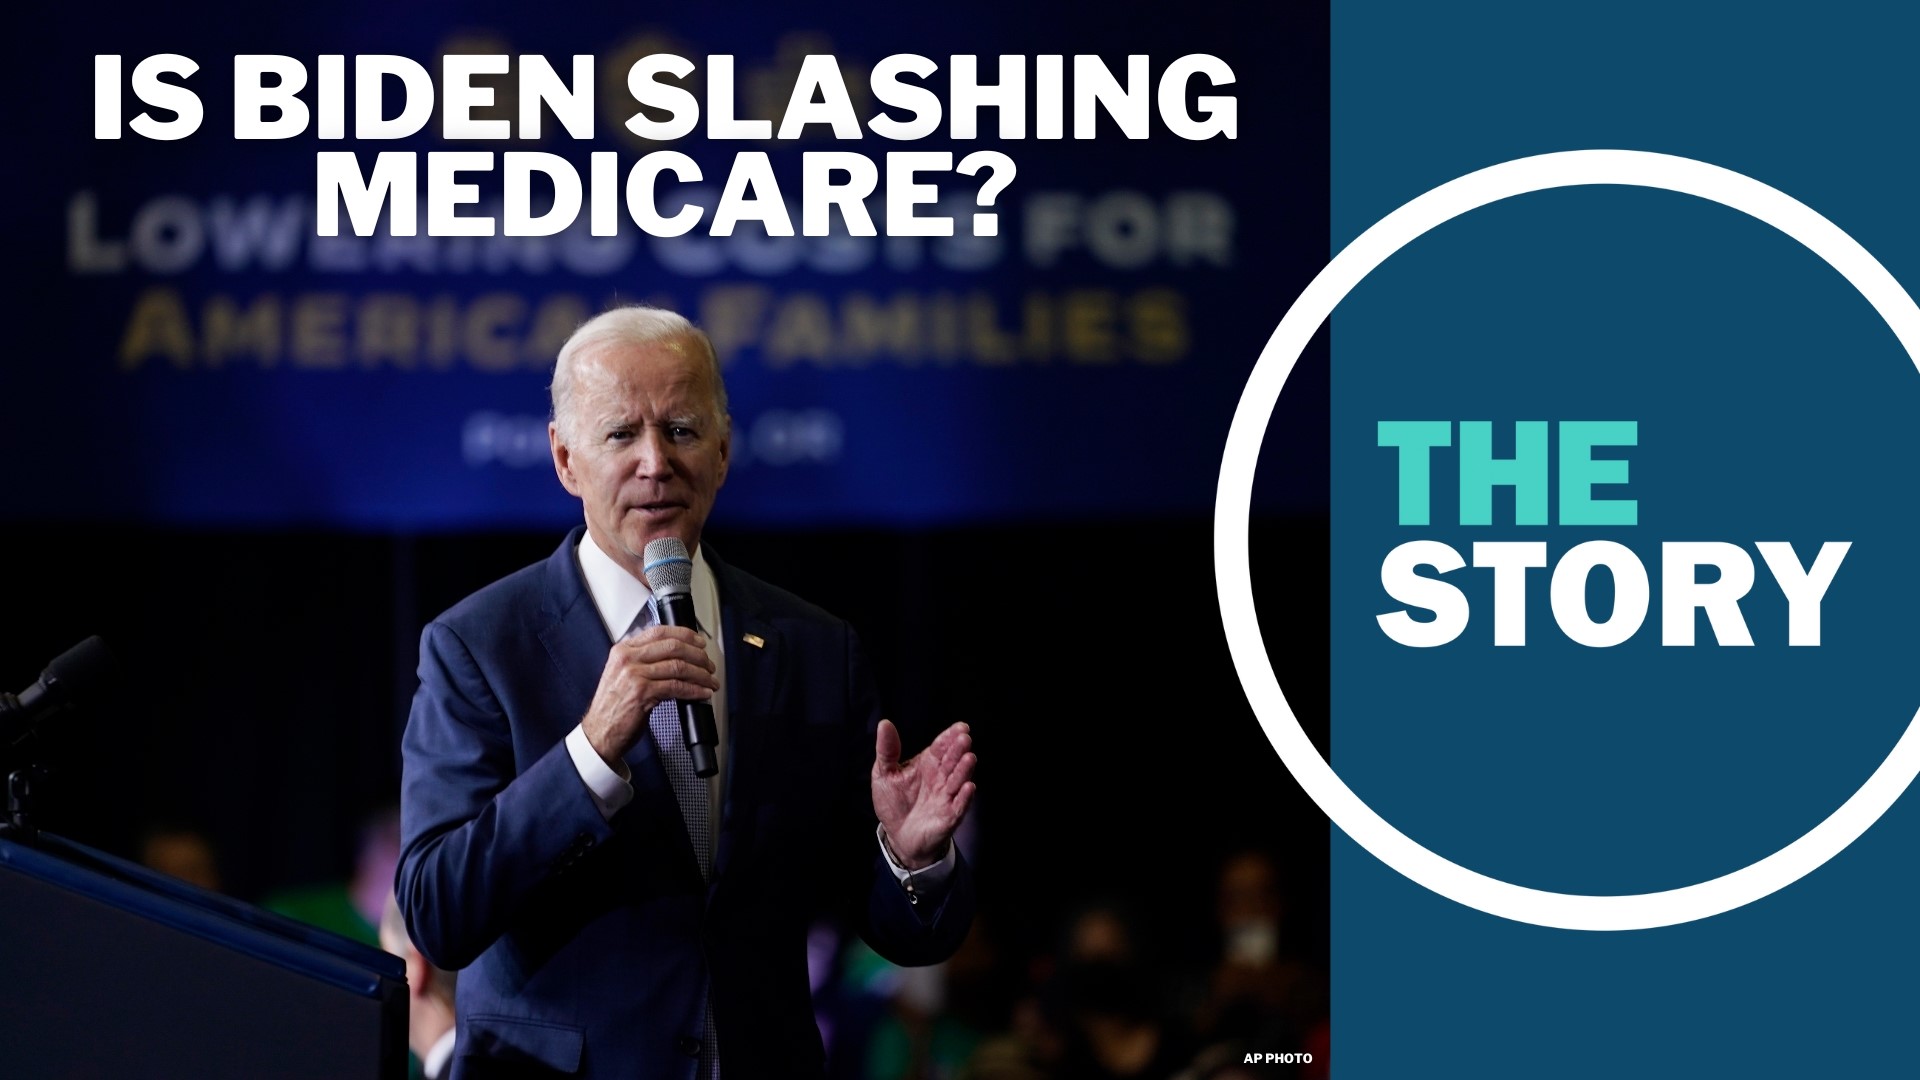 An ad running in recent weeks accuses Pres. Biden of cutting Medicare Advantage benefits while U.S. Rep. Gluesenkamp Perez sits idly by.